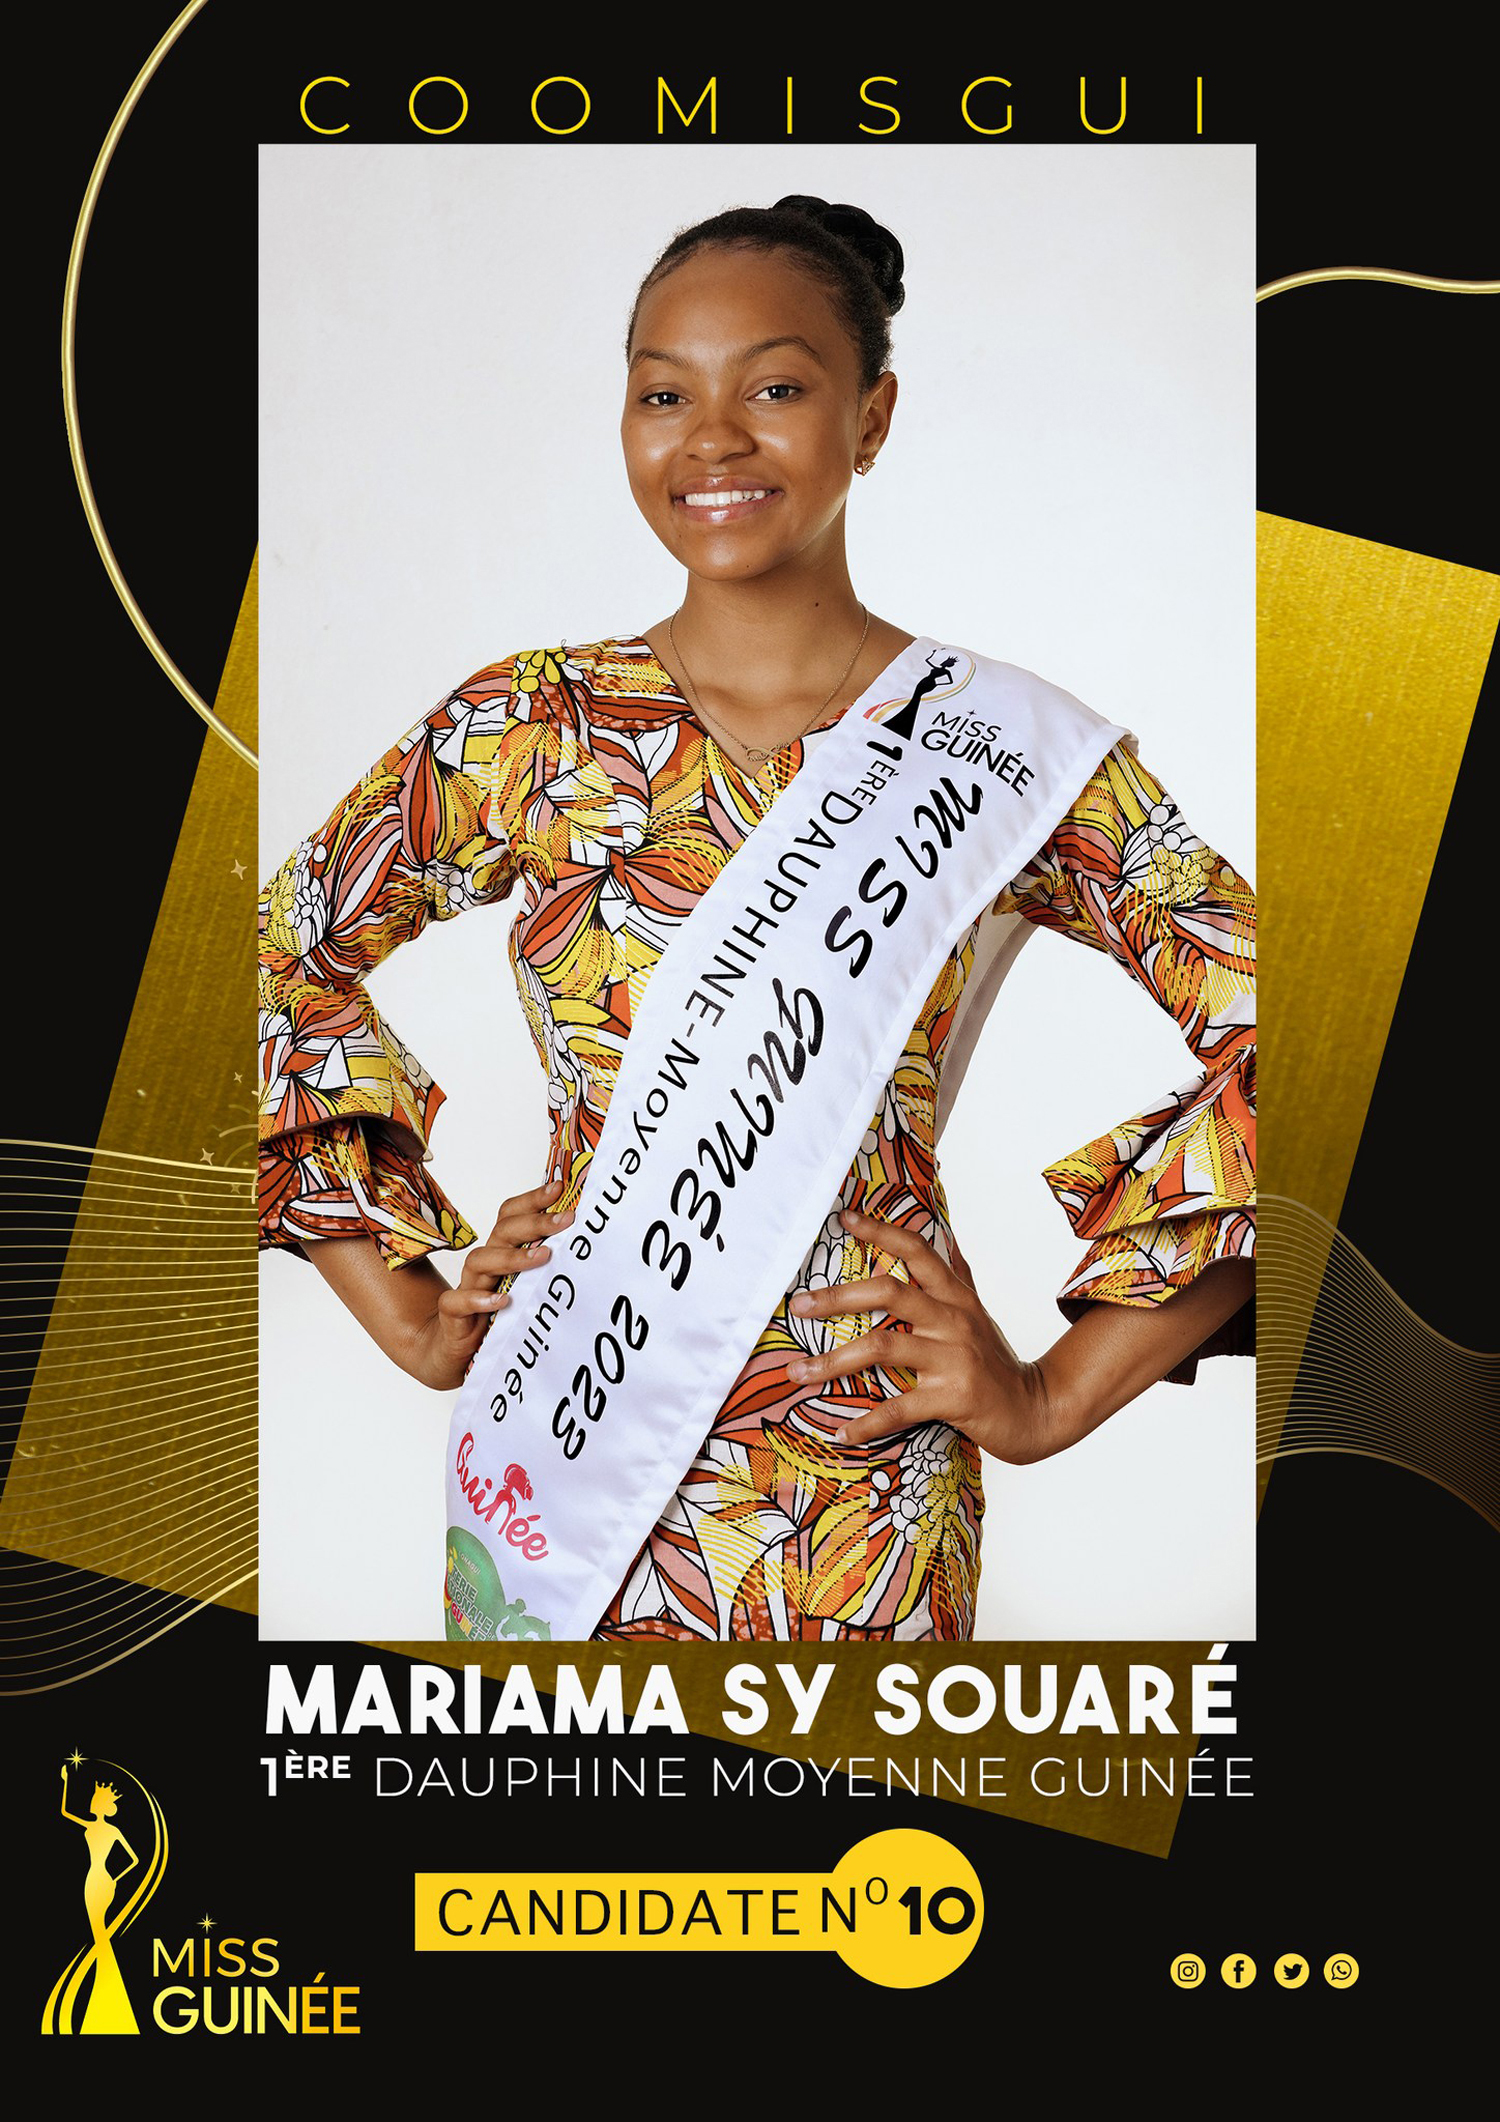 The-Comity-of-COOMISGUI-Mrs-AMINATA-DIALLO -presents-the-Finalist-of-MISS-GUINEE-2023-Miss-MARIAMA-SY-SOUARErepresenting-FIRST-RUNNER-Miss-MOYENNE-GUINEE-CANDIDATE-Number-10-DN-AFRICA MEDIA PARTNER